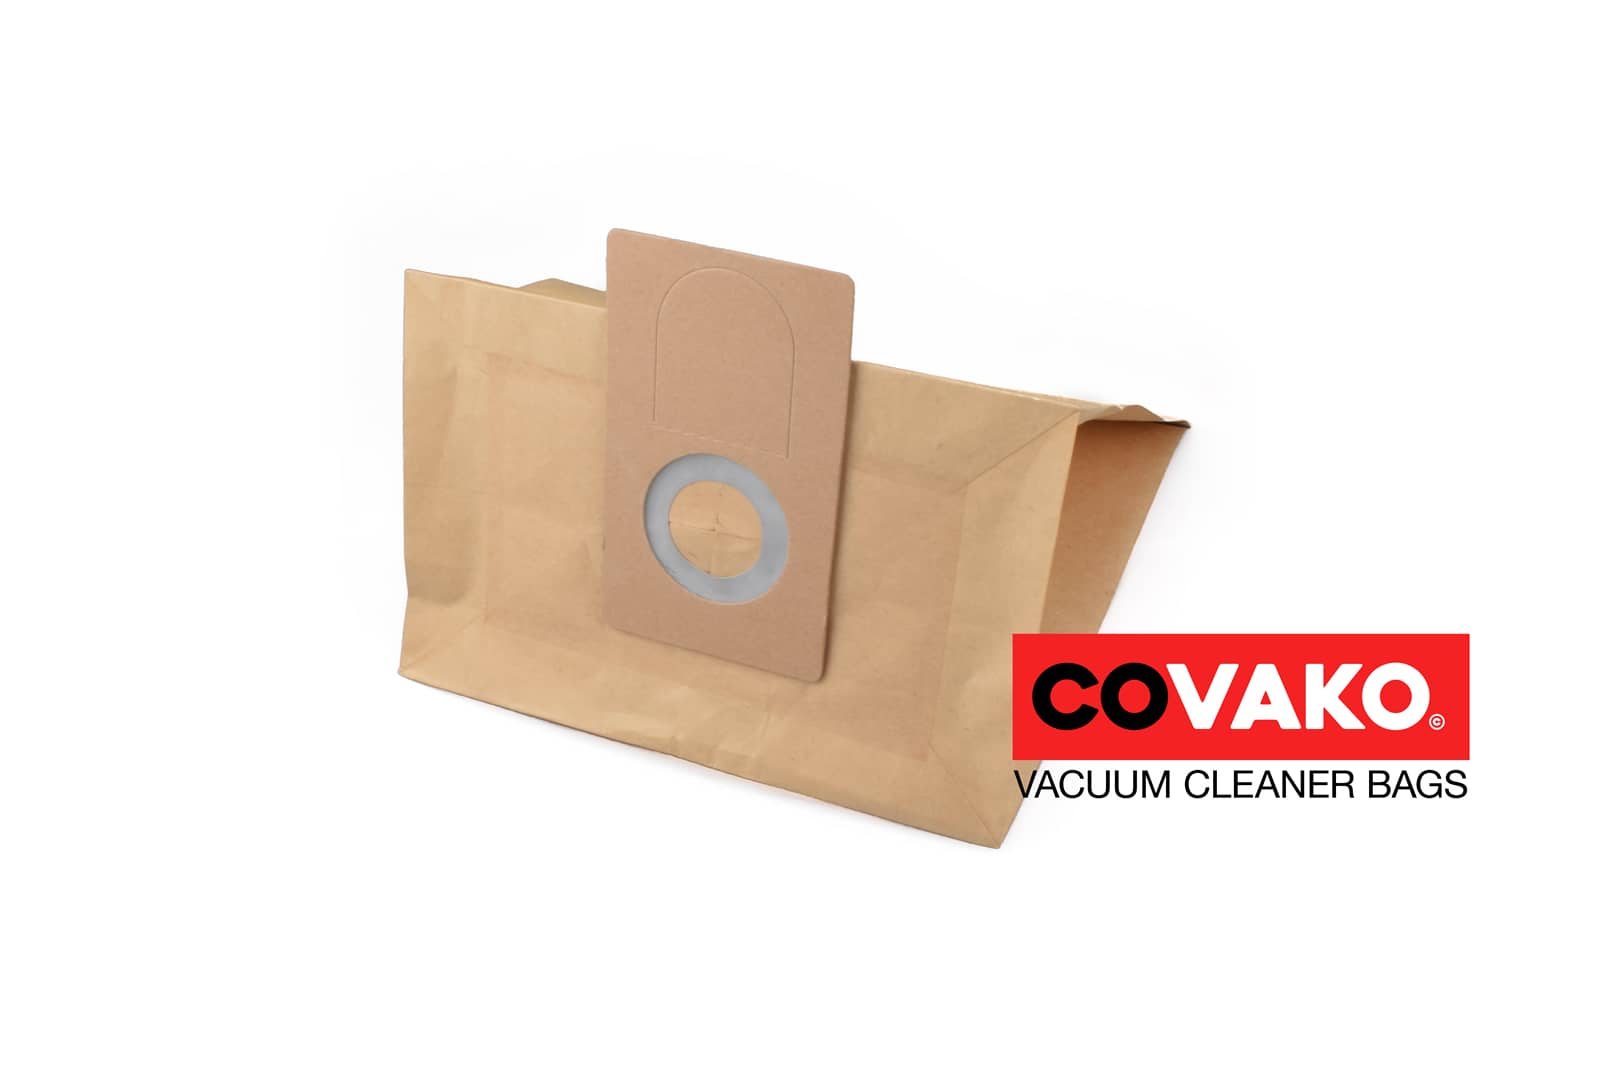 Fast S1 / Paper - Fast vacuum cleaner bags